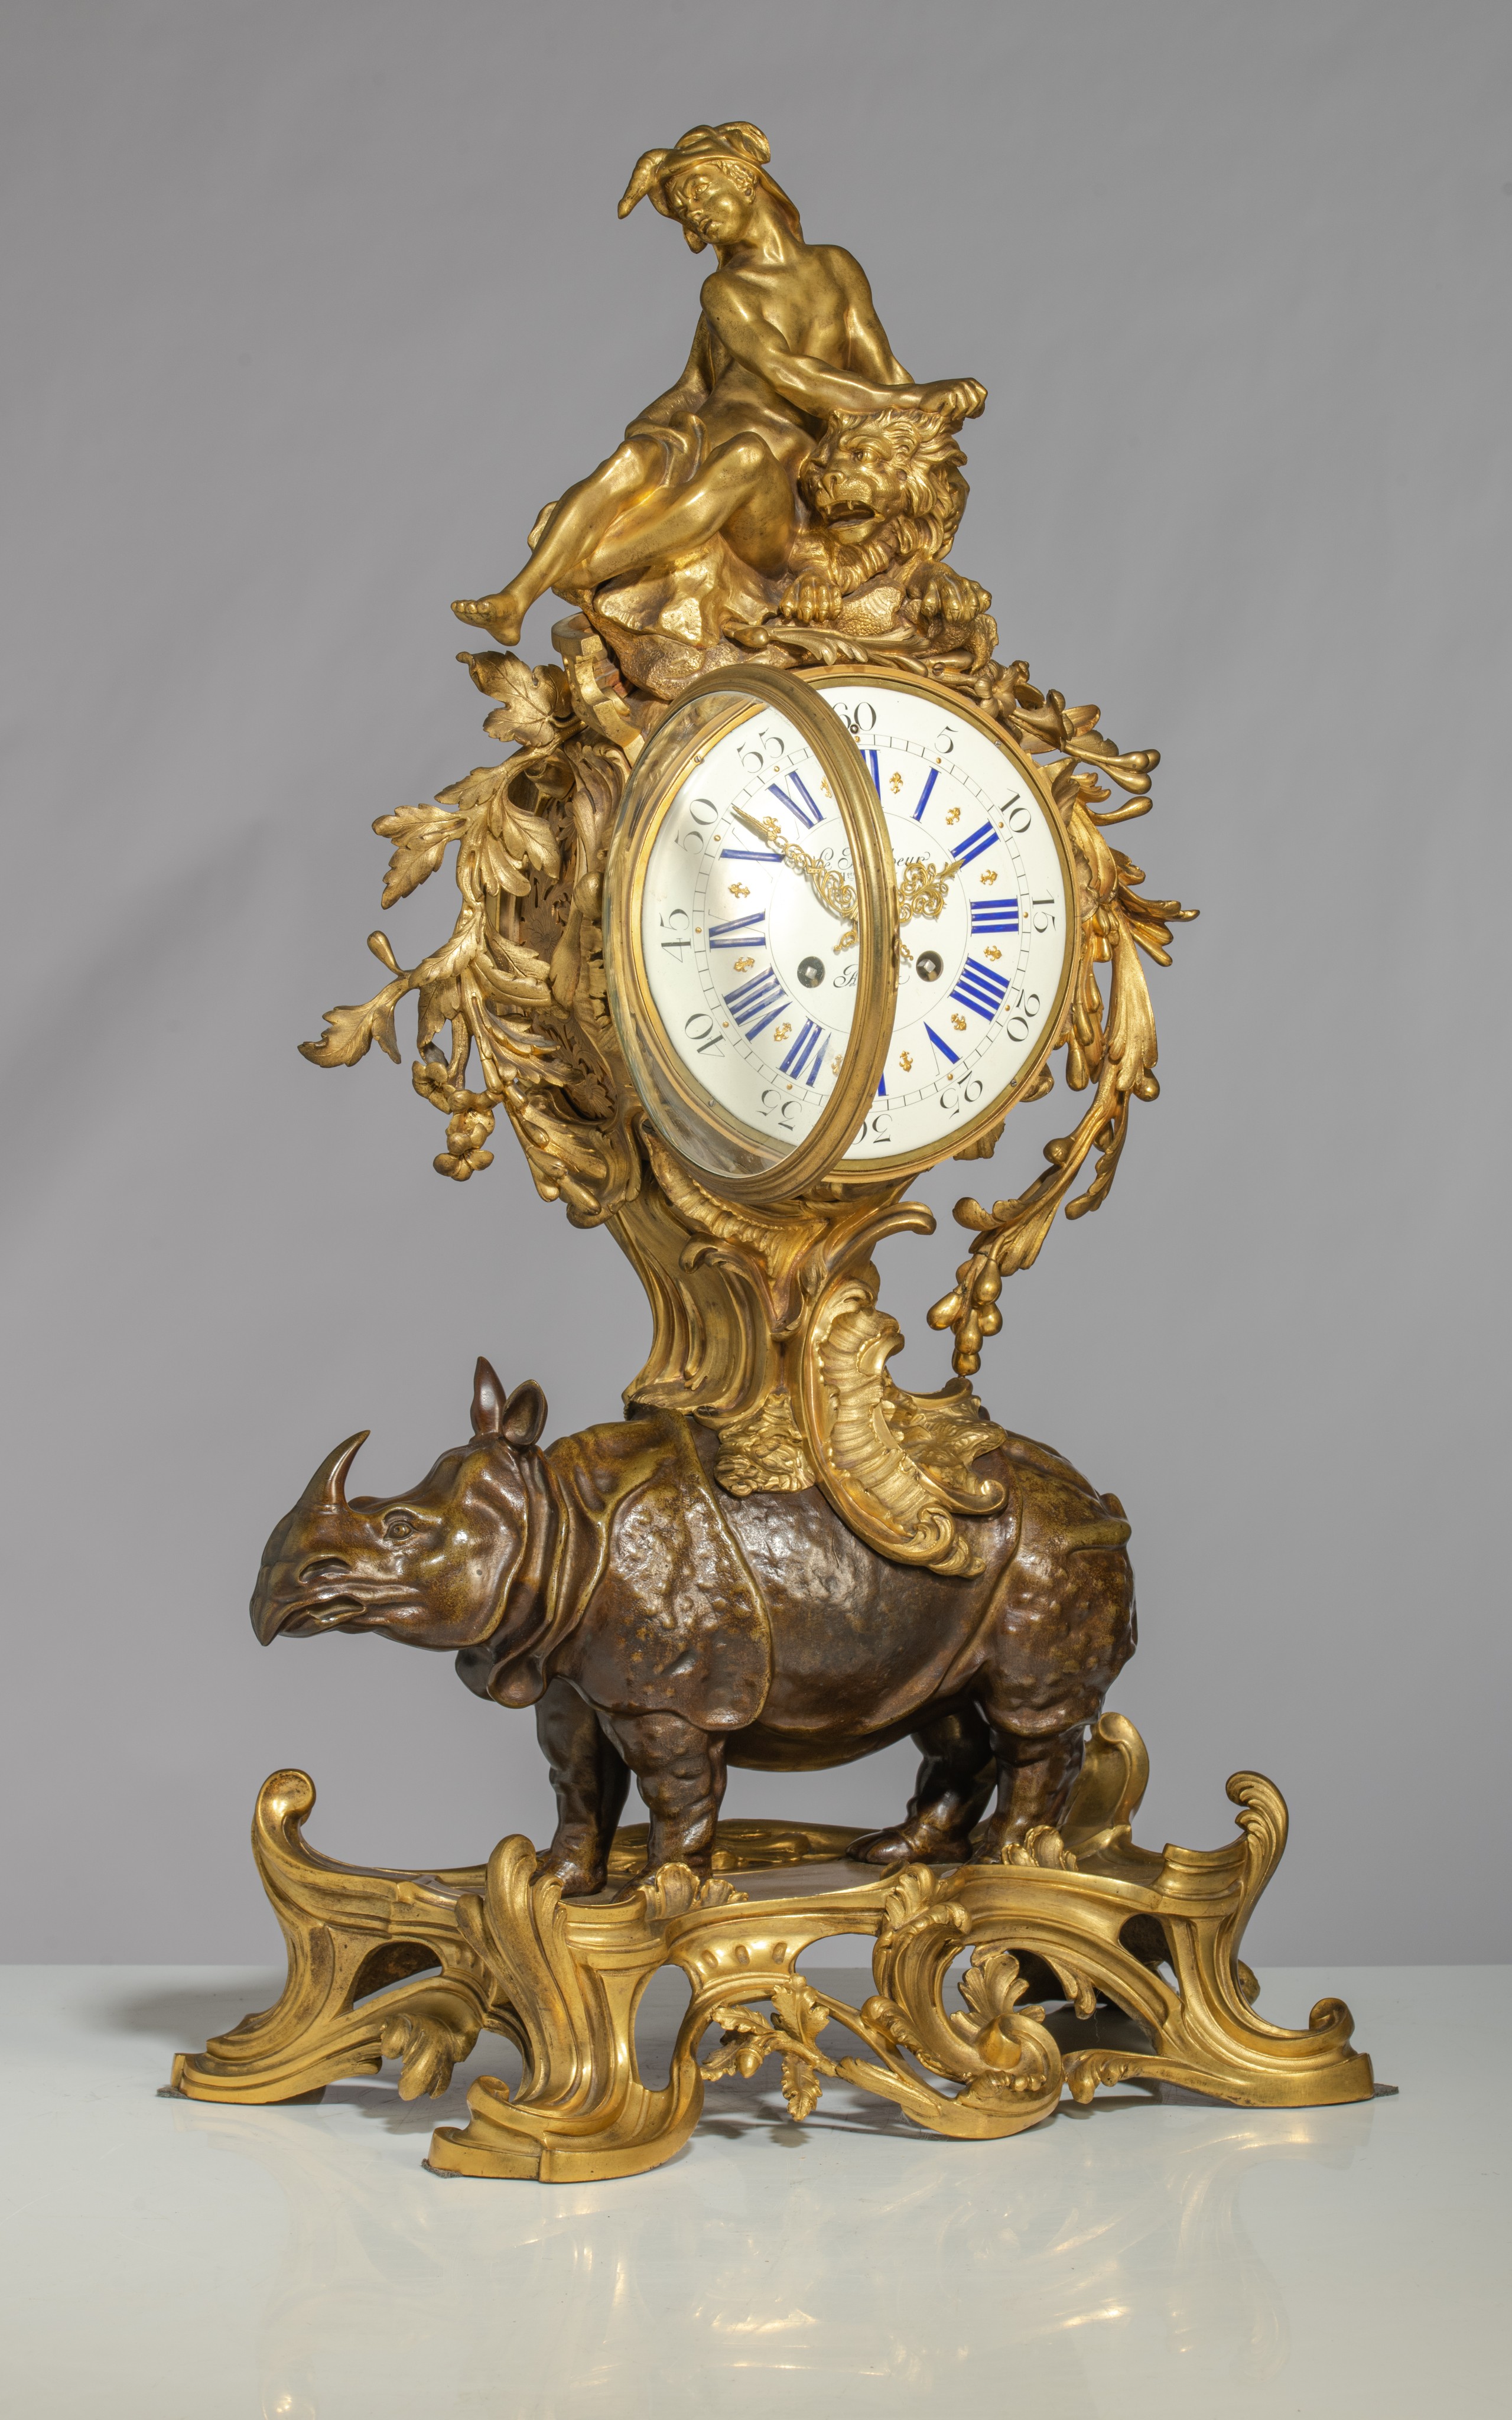 A very imposing Rococo style rhinoceros mantel clock, the dial signed 'Le Faucheur, Paris', H 77 - W - Image 4 of 12